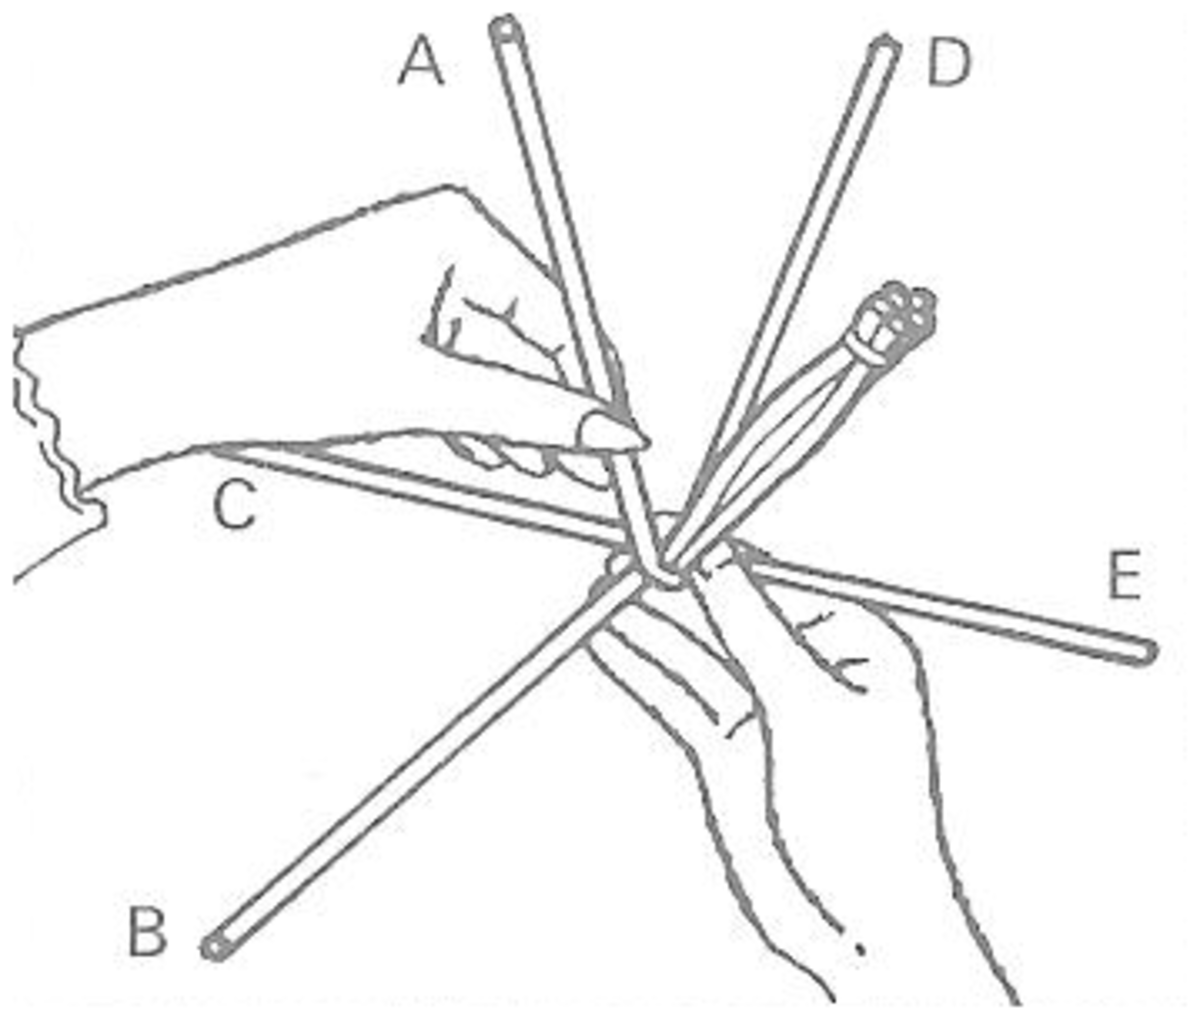 Figure 2: Weaving Round a Former - Second Stage